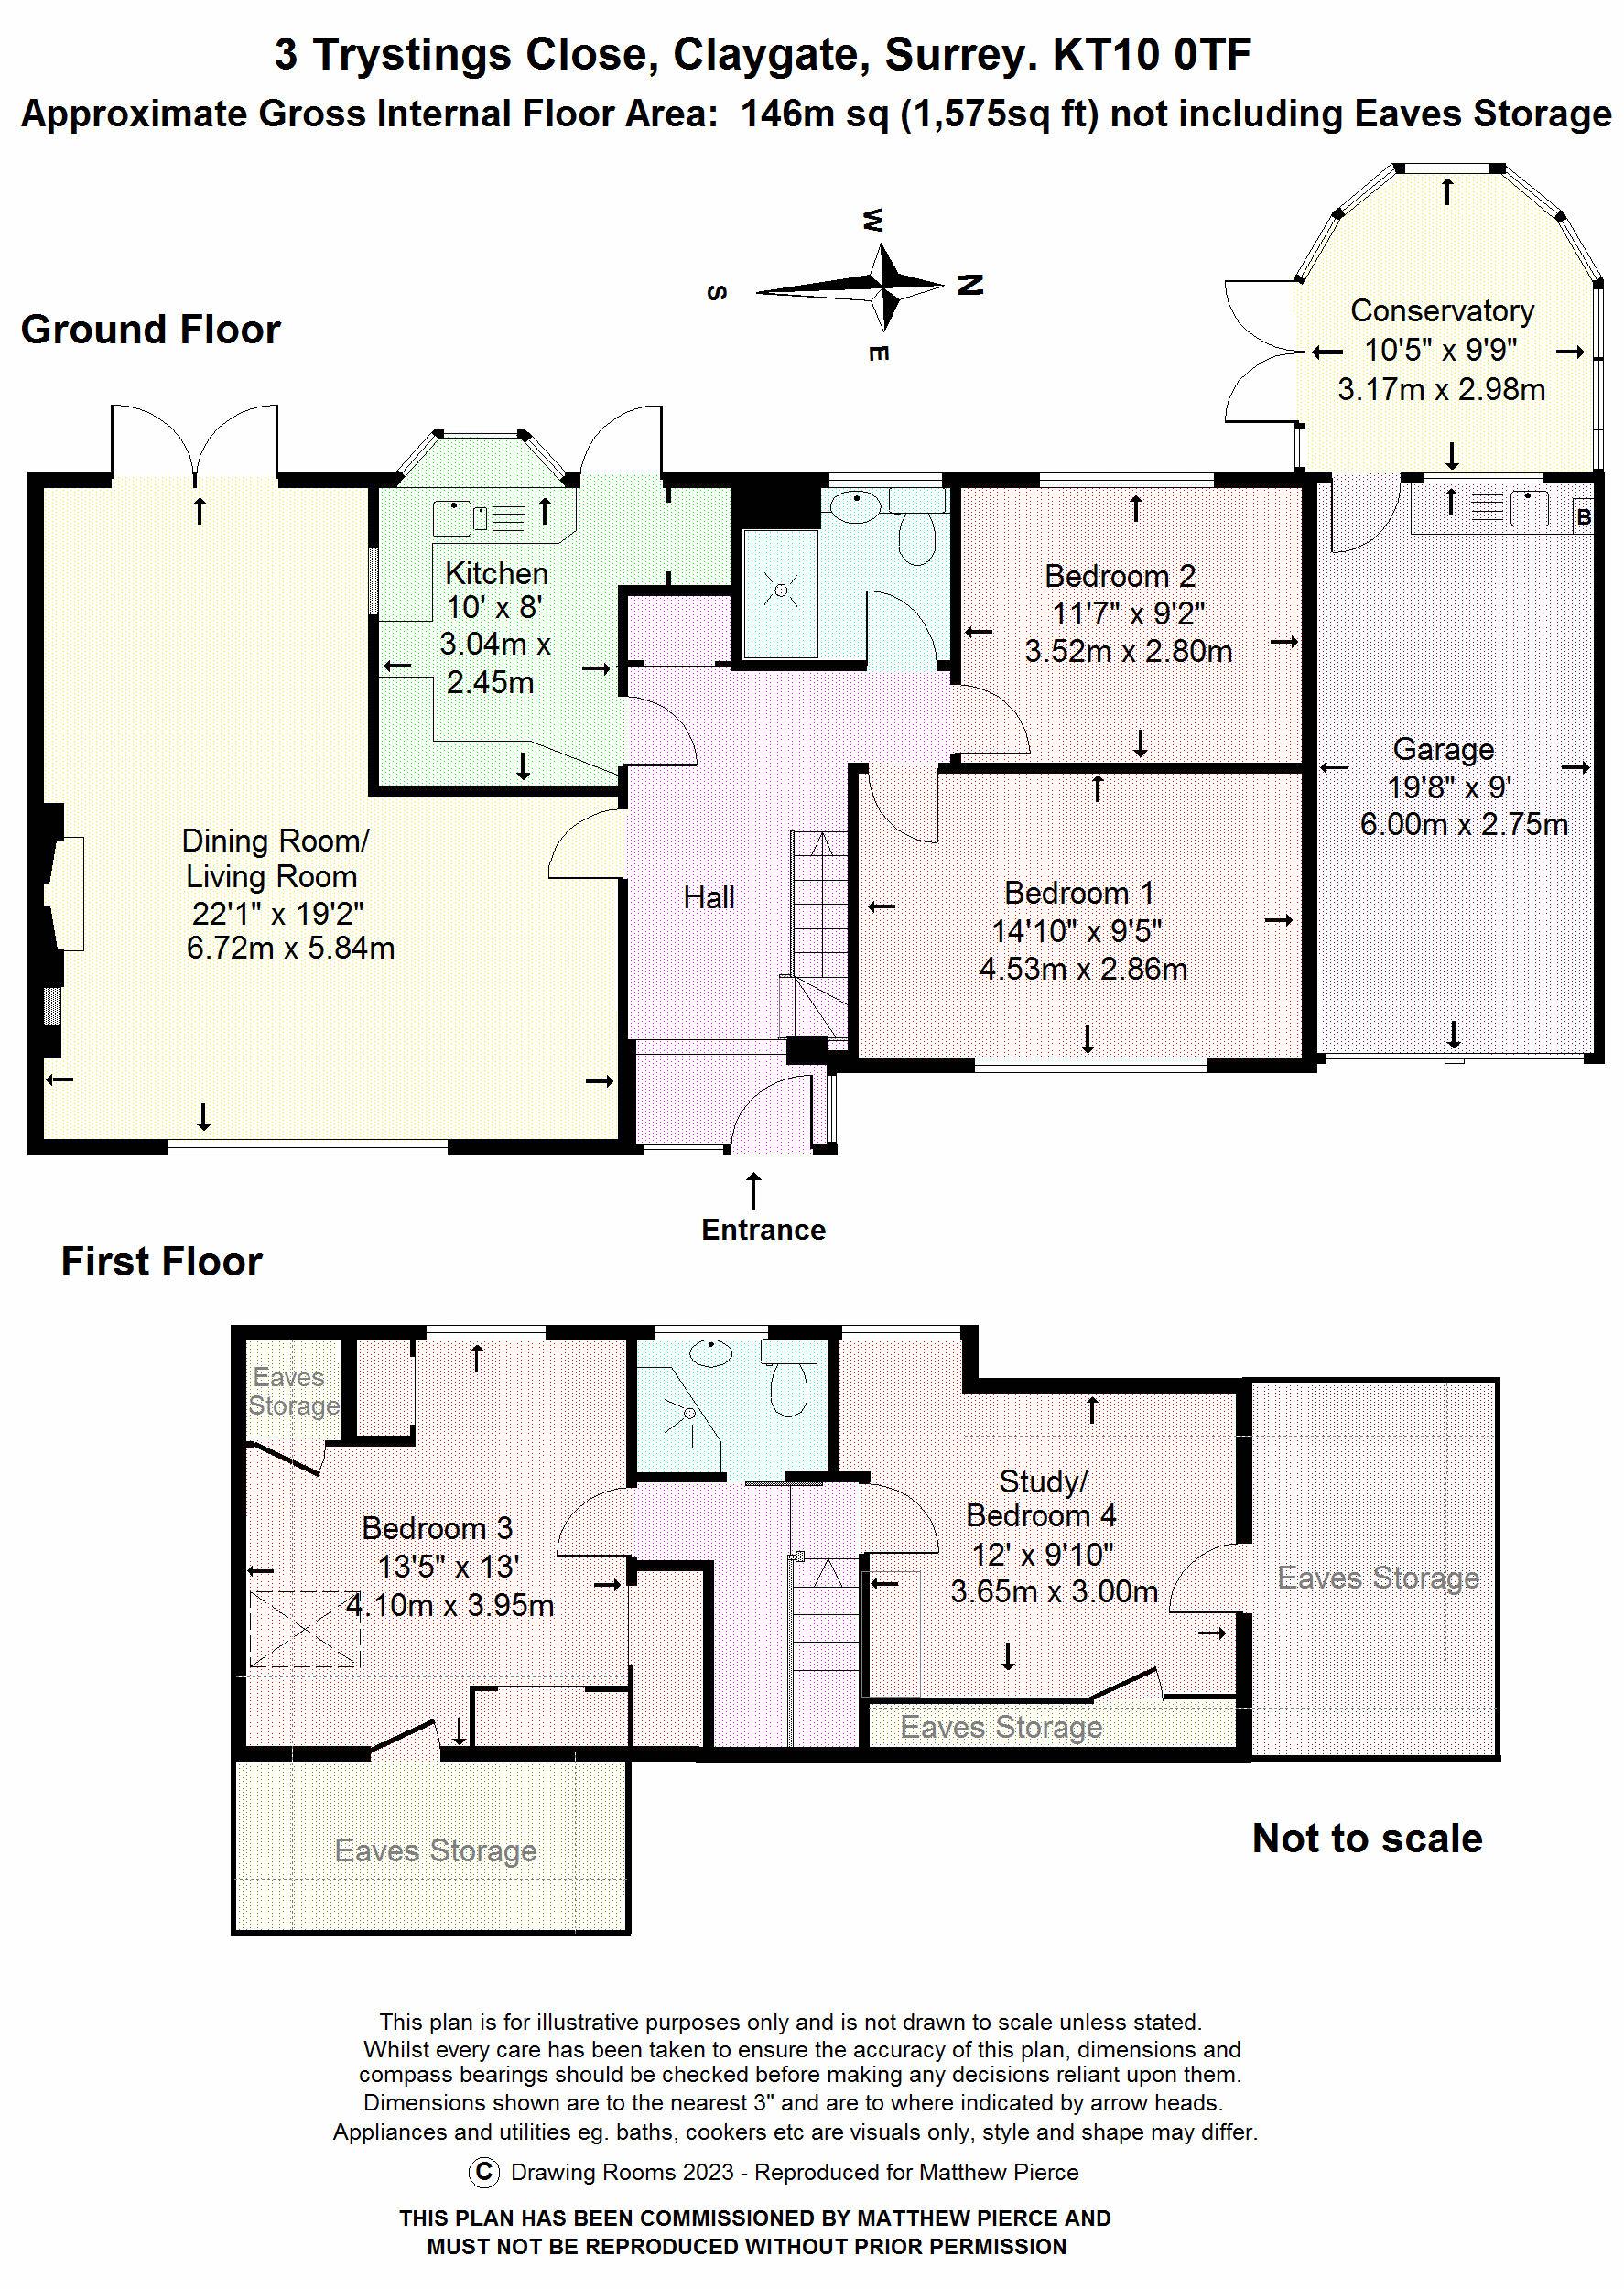 Floorplans For Trystings Close, Claygate